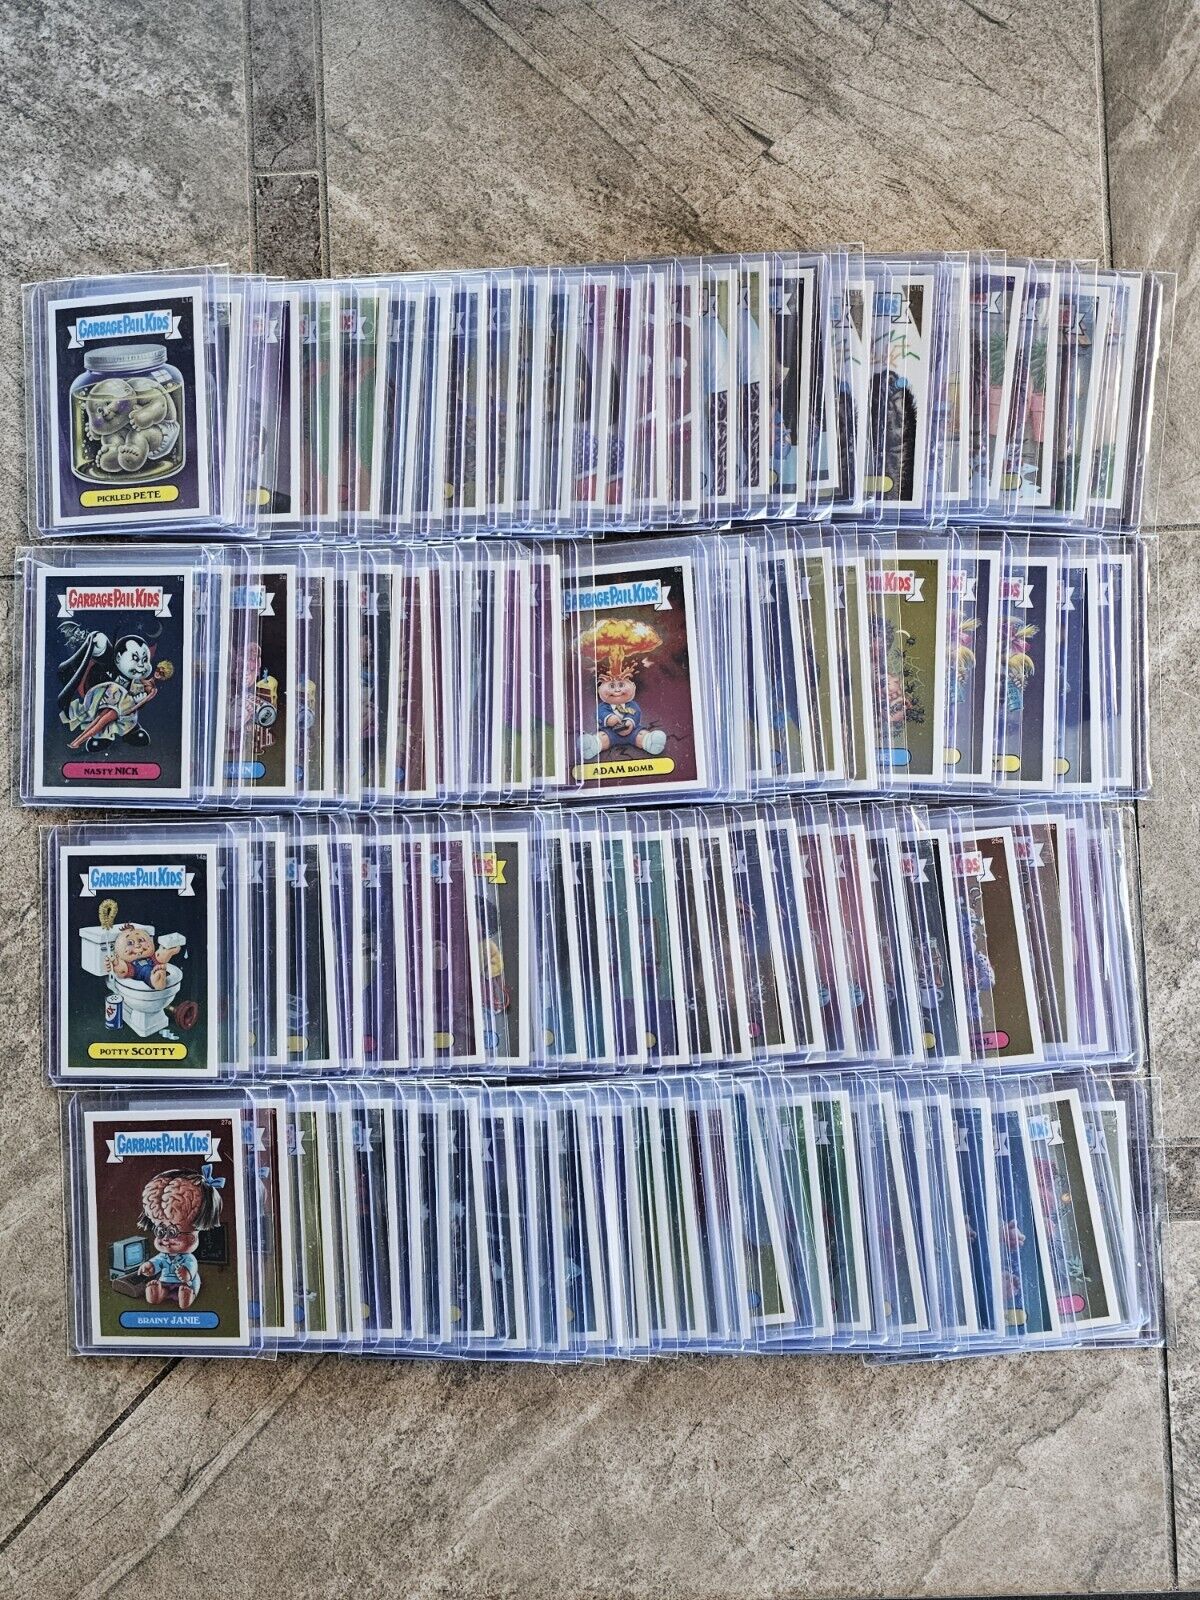 2013 GARBAGE PAIL KIDS CHROME SERIES 1 COMPLETE SET 110 CARDS A&B + LOST 🔥 🔥 